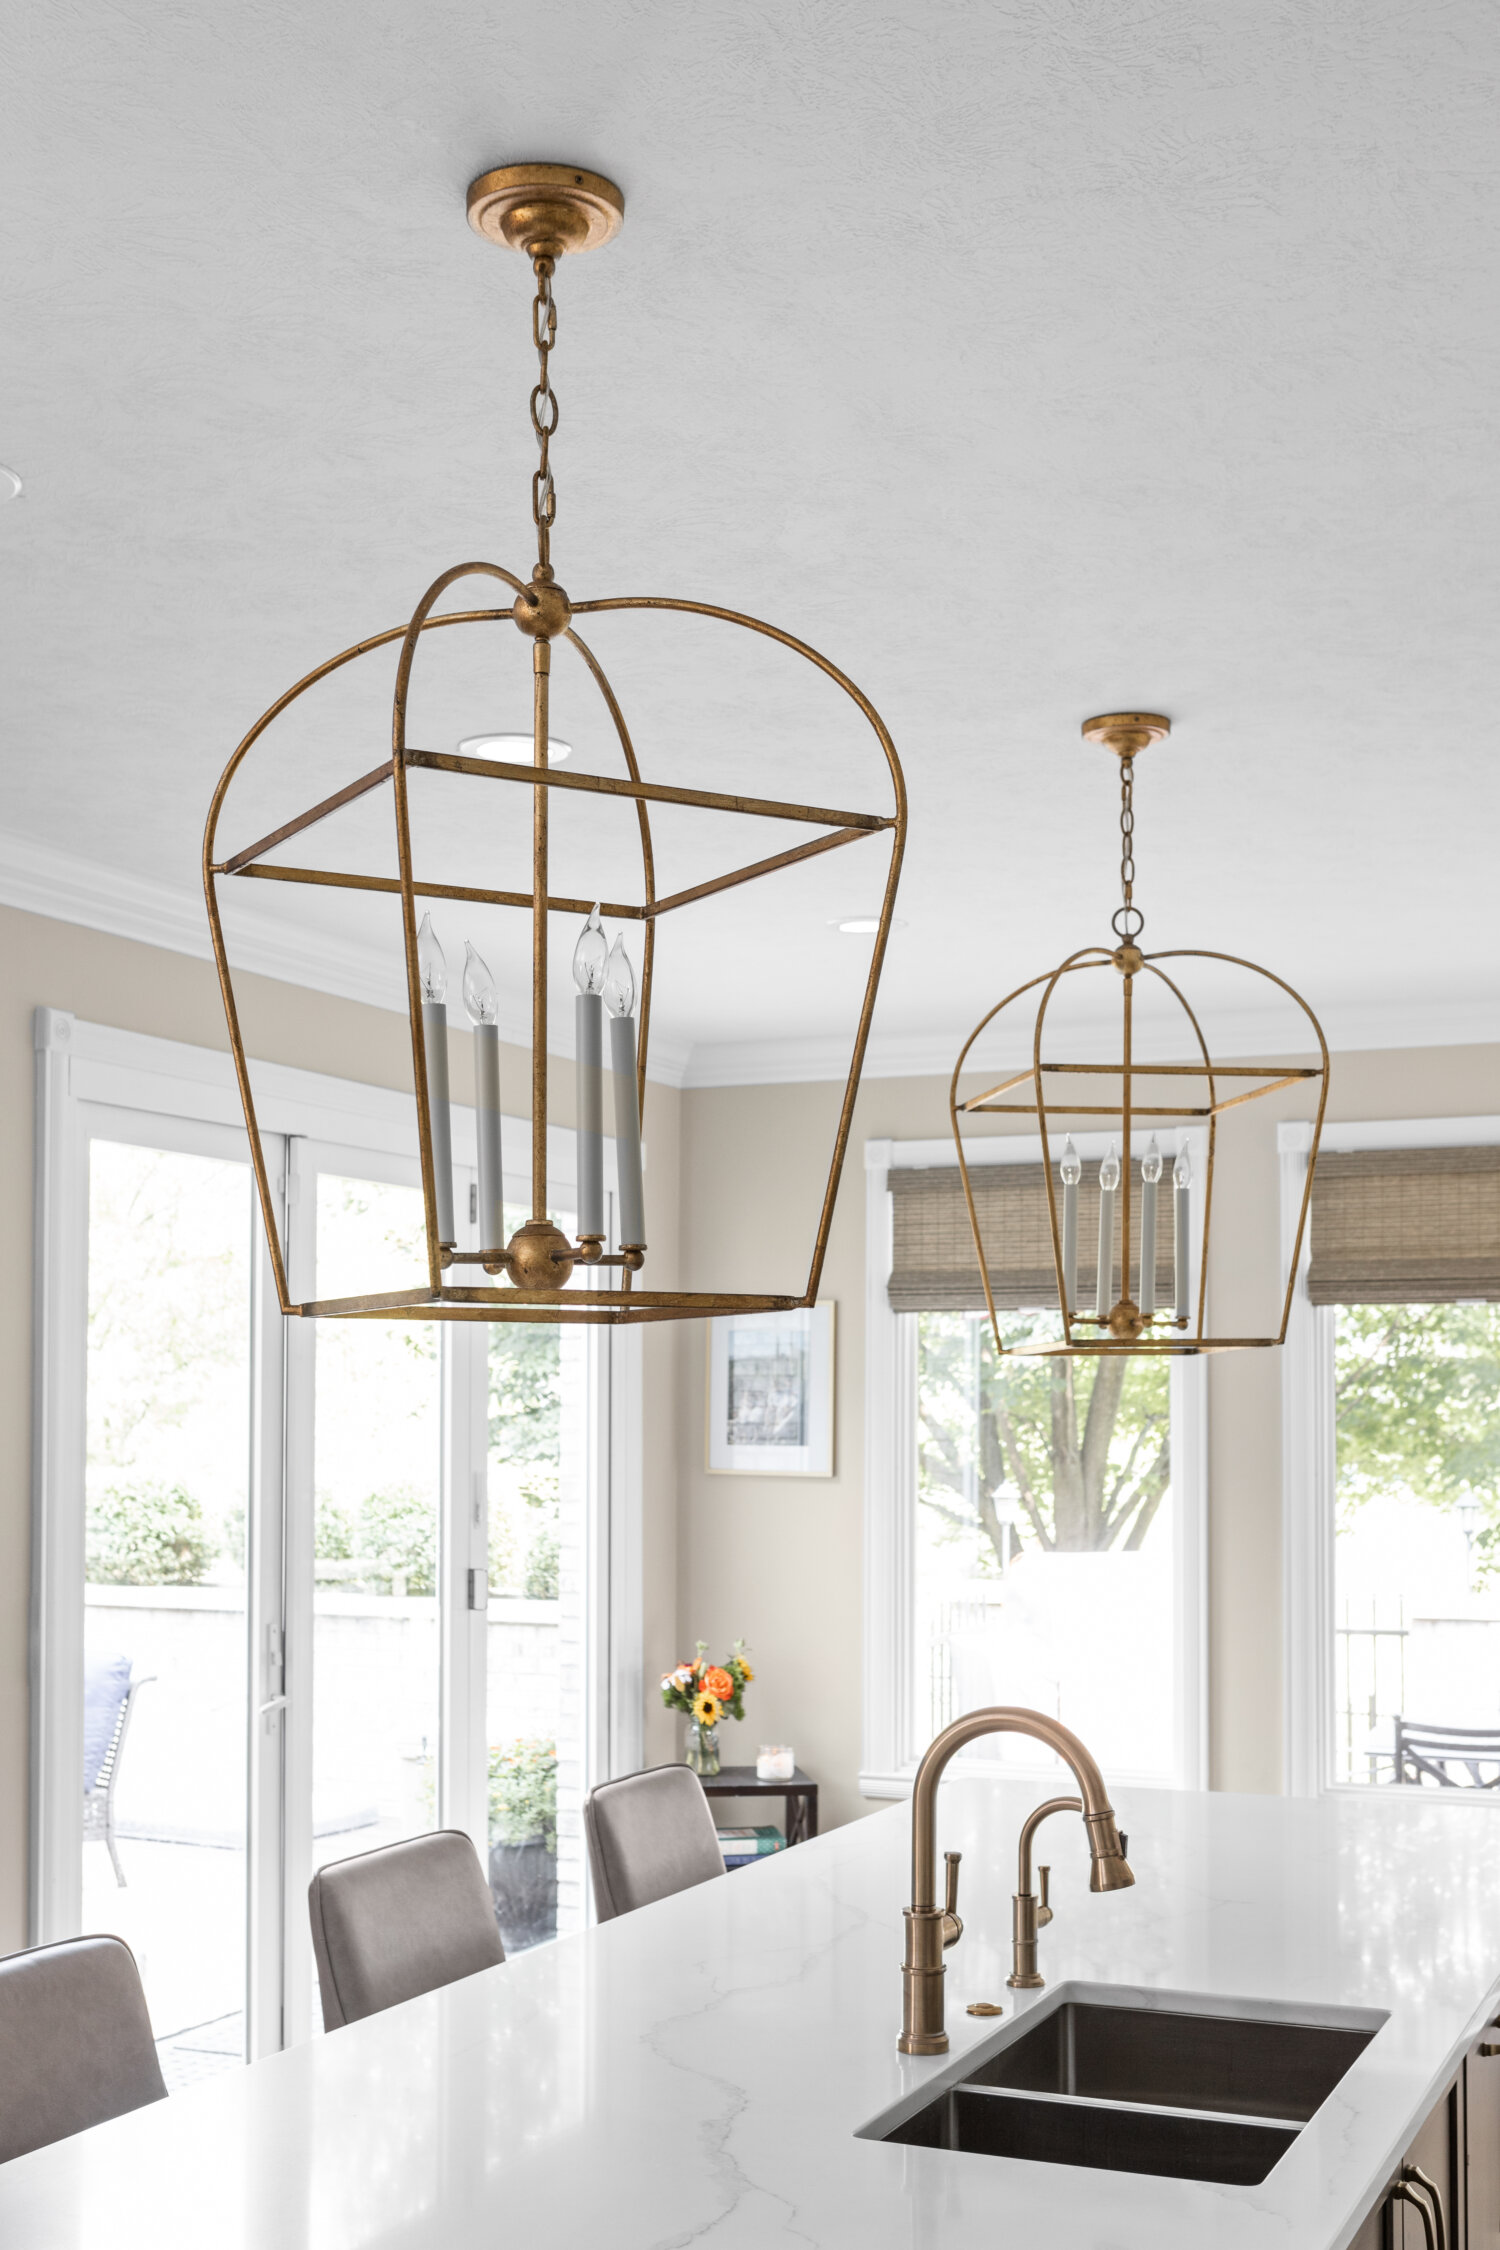 Two brushed brass lantern style pendant lights for above a kitchen island.